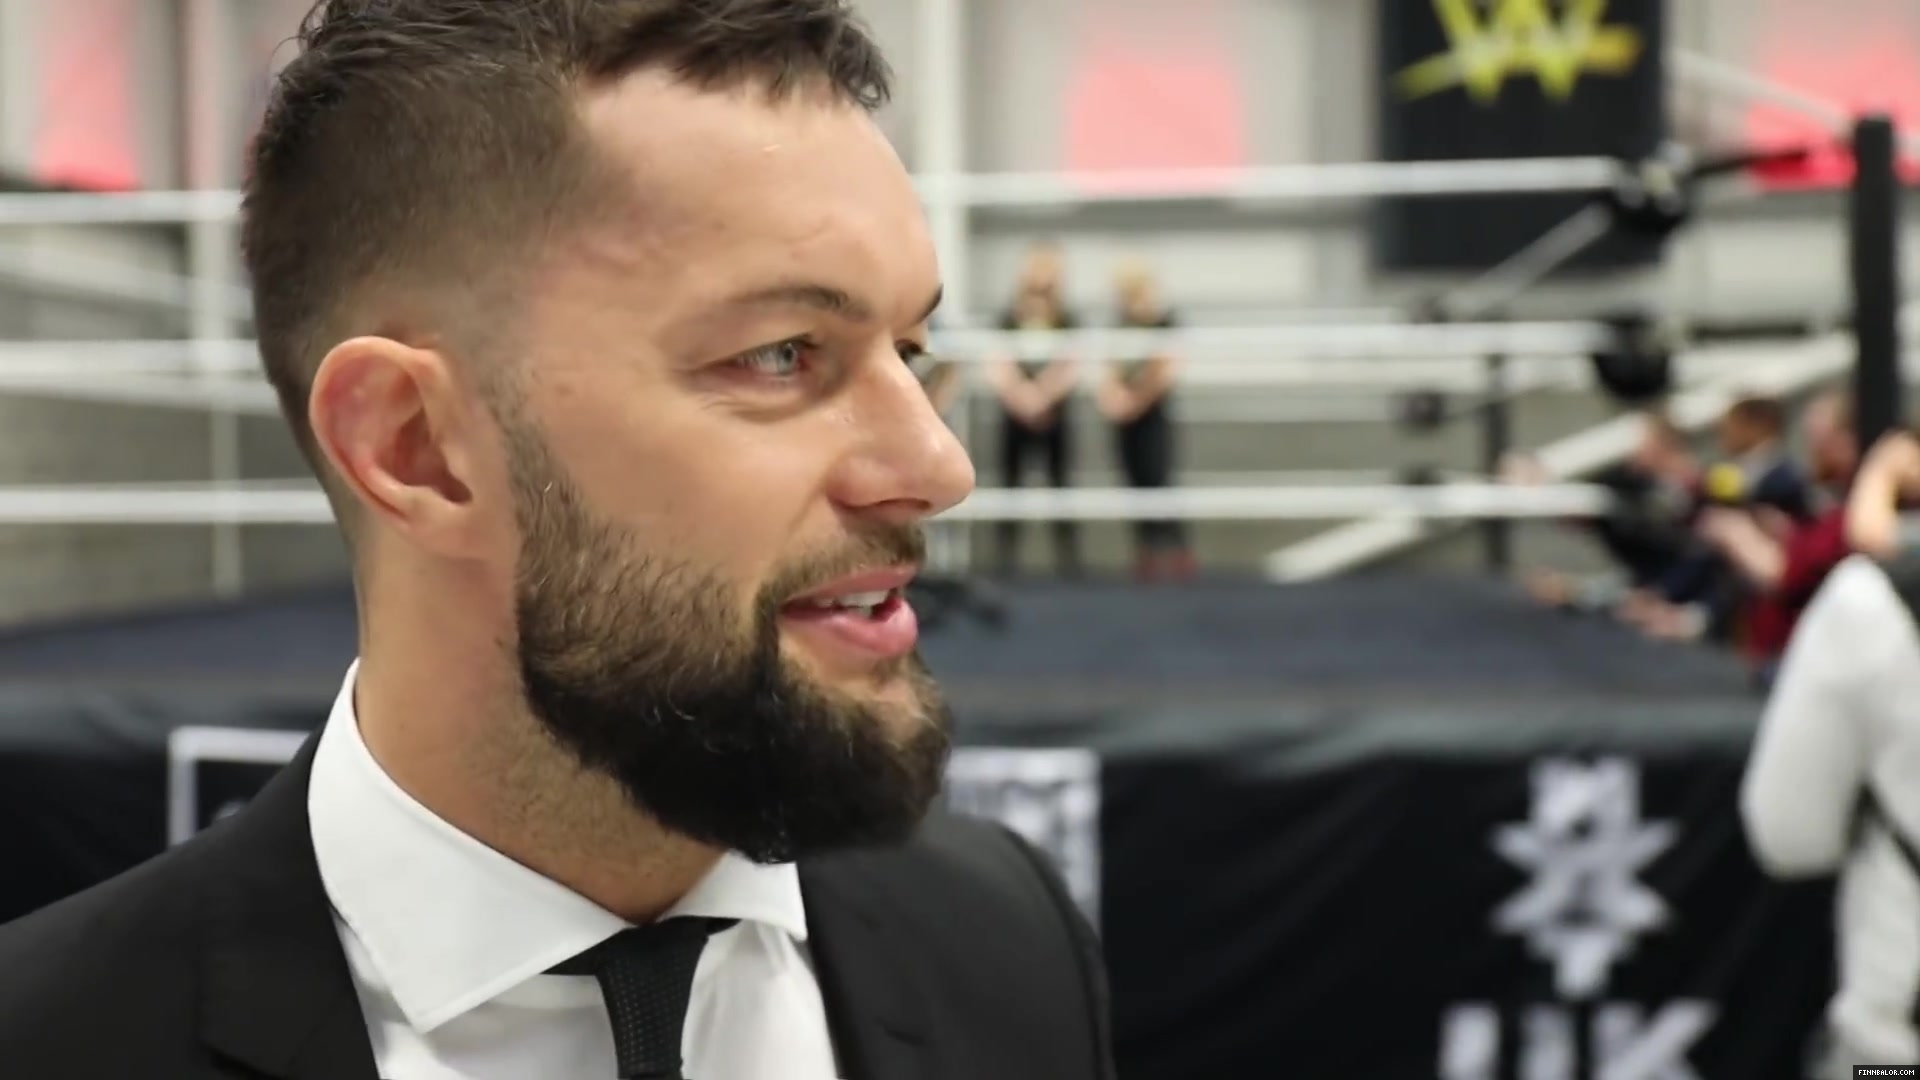 WWE_Superstar_FINN_BALOR_joins_MOUSTACHE_MOUNTAIN_at_the_opening_of_the_NXT_UK_PC_059.jpg